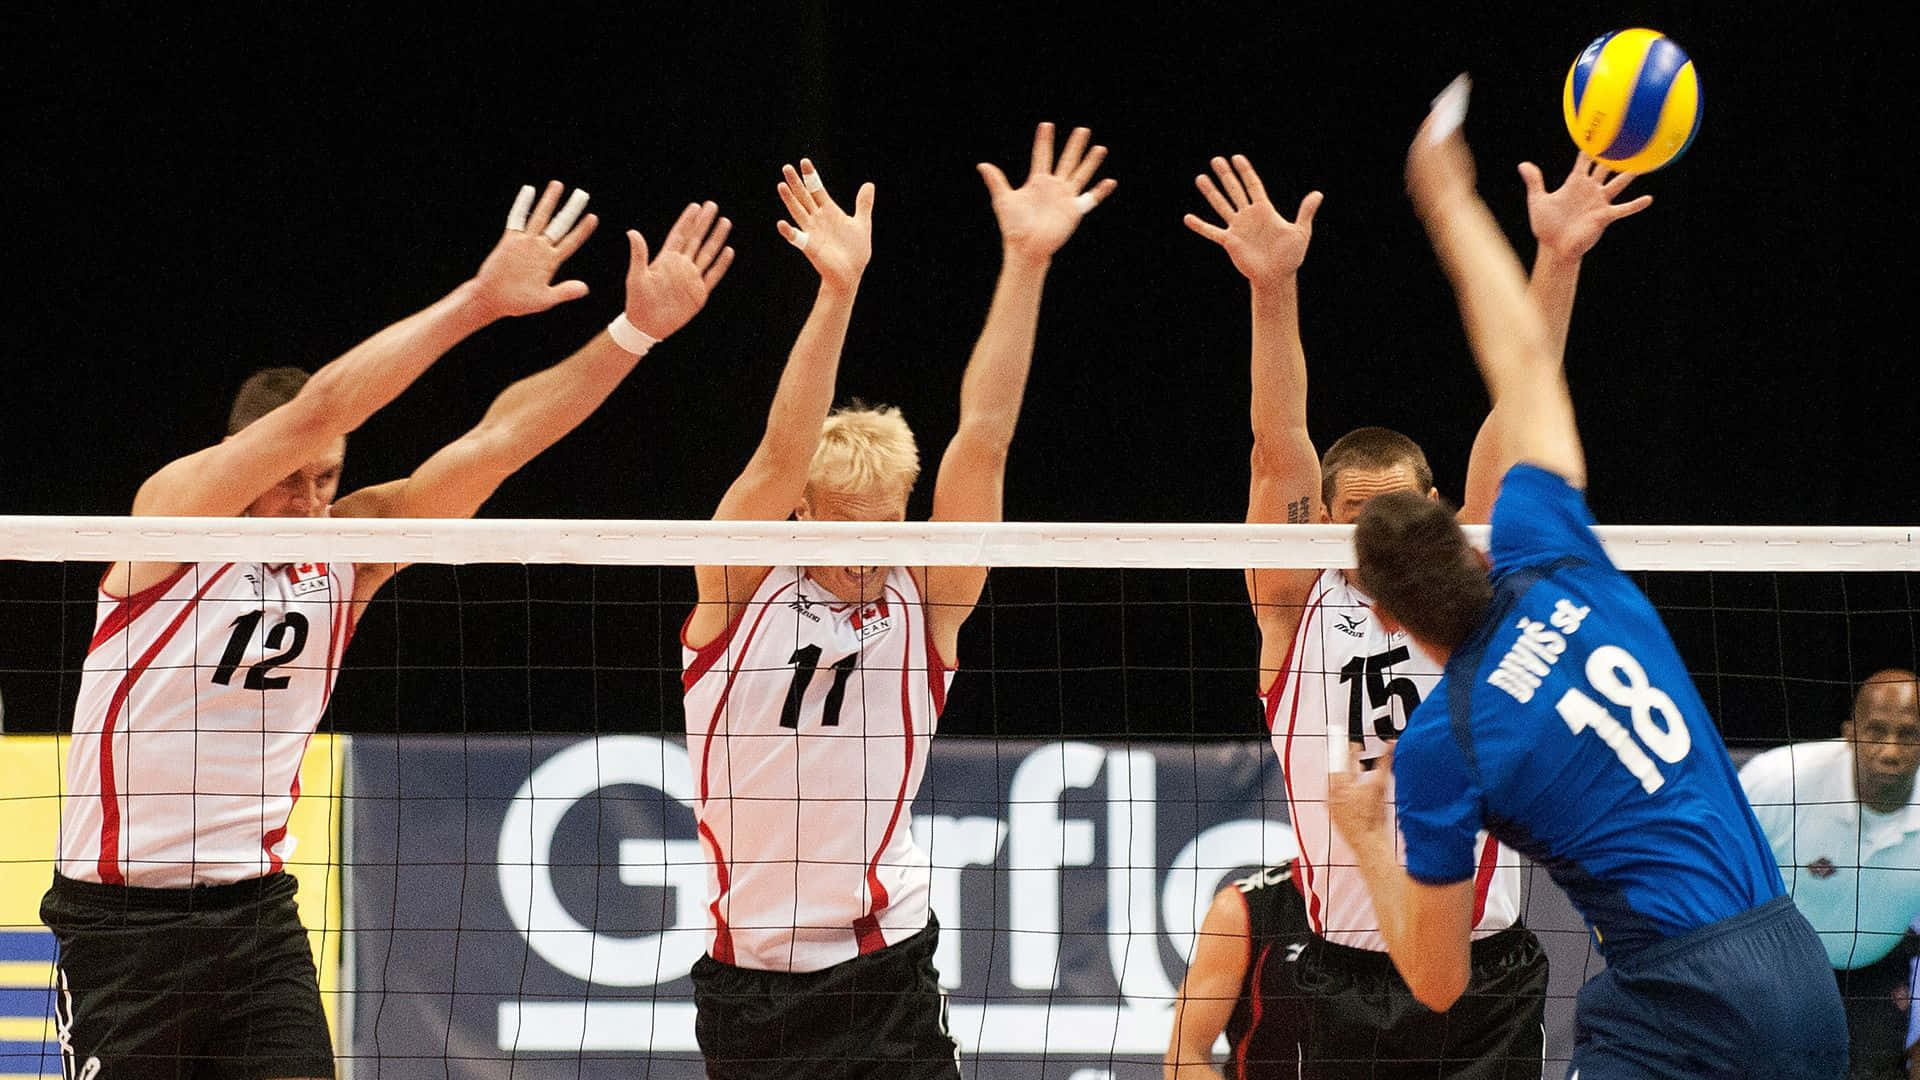 A Group Of Men Playing Volleyball